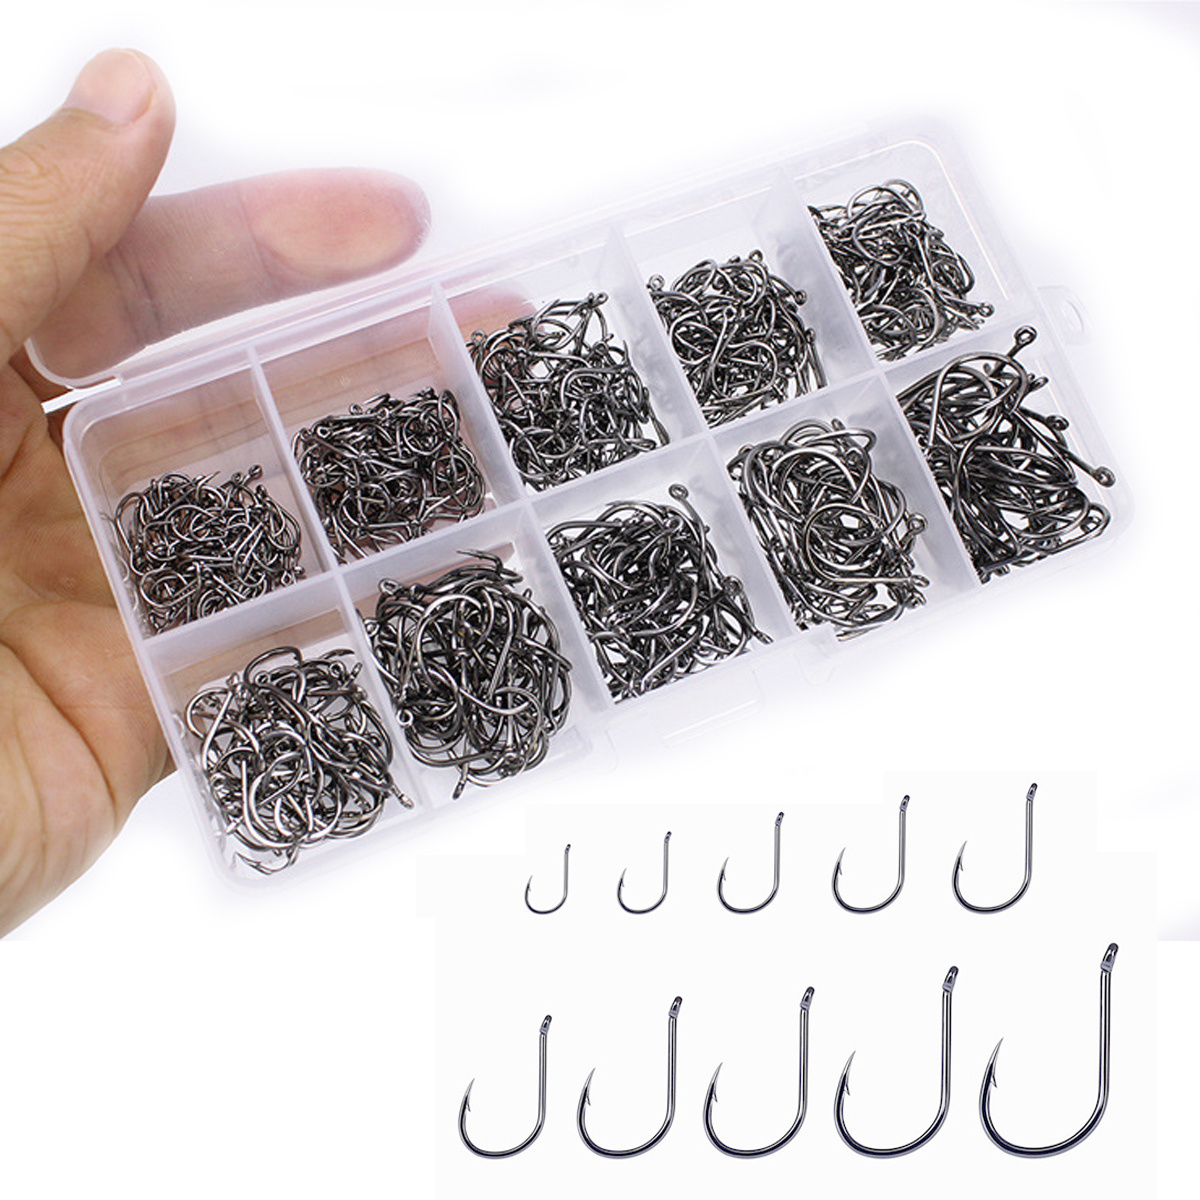 scheibe 500pcs High Carbon Steel Fishing Hooks with Plastic Box, 10 Sizes  Fish Hook with Barbs for Freshwater/Seawater, 3# - 12#(50pcs/ Size)